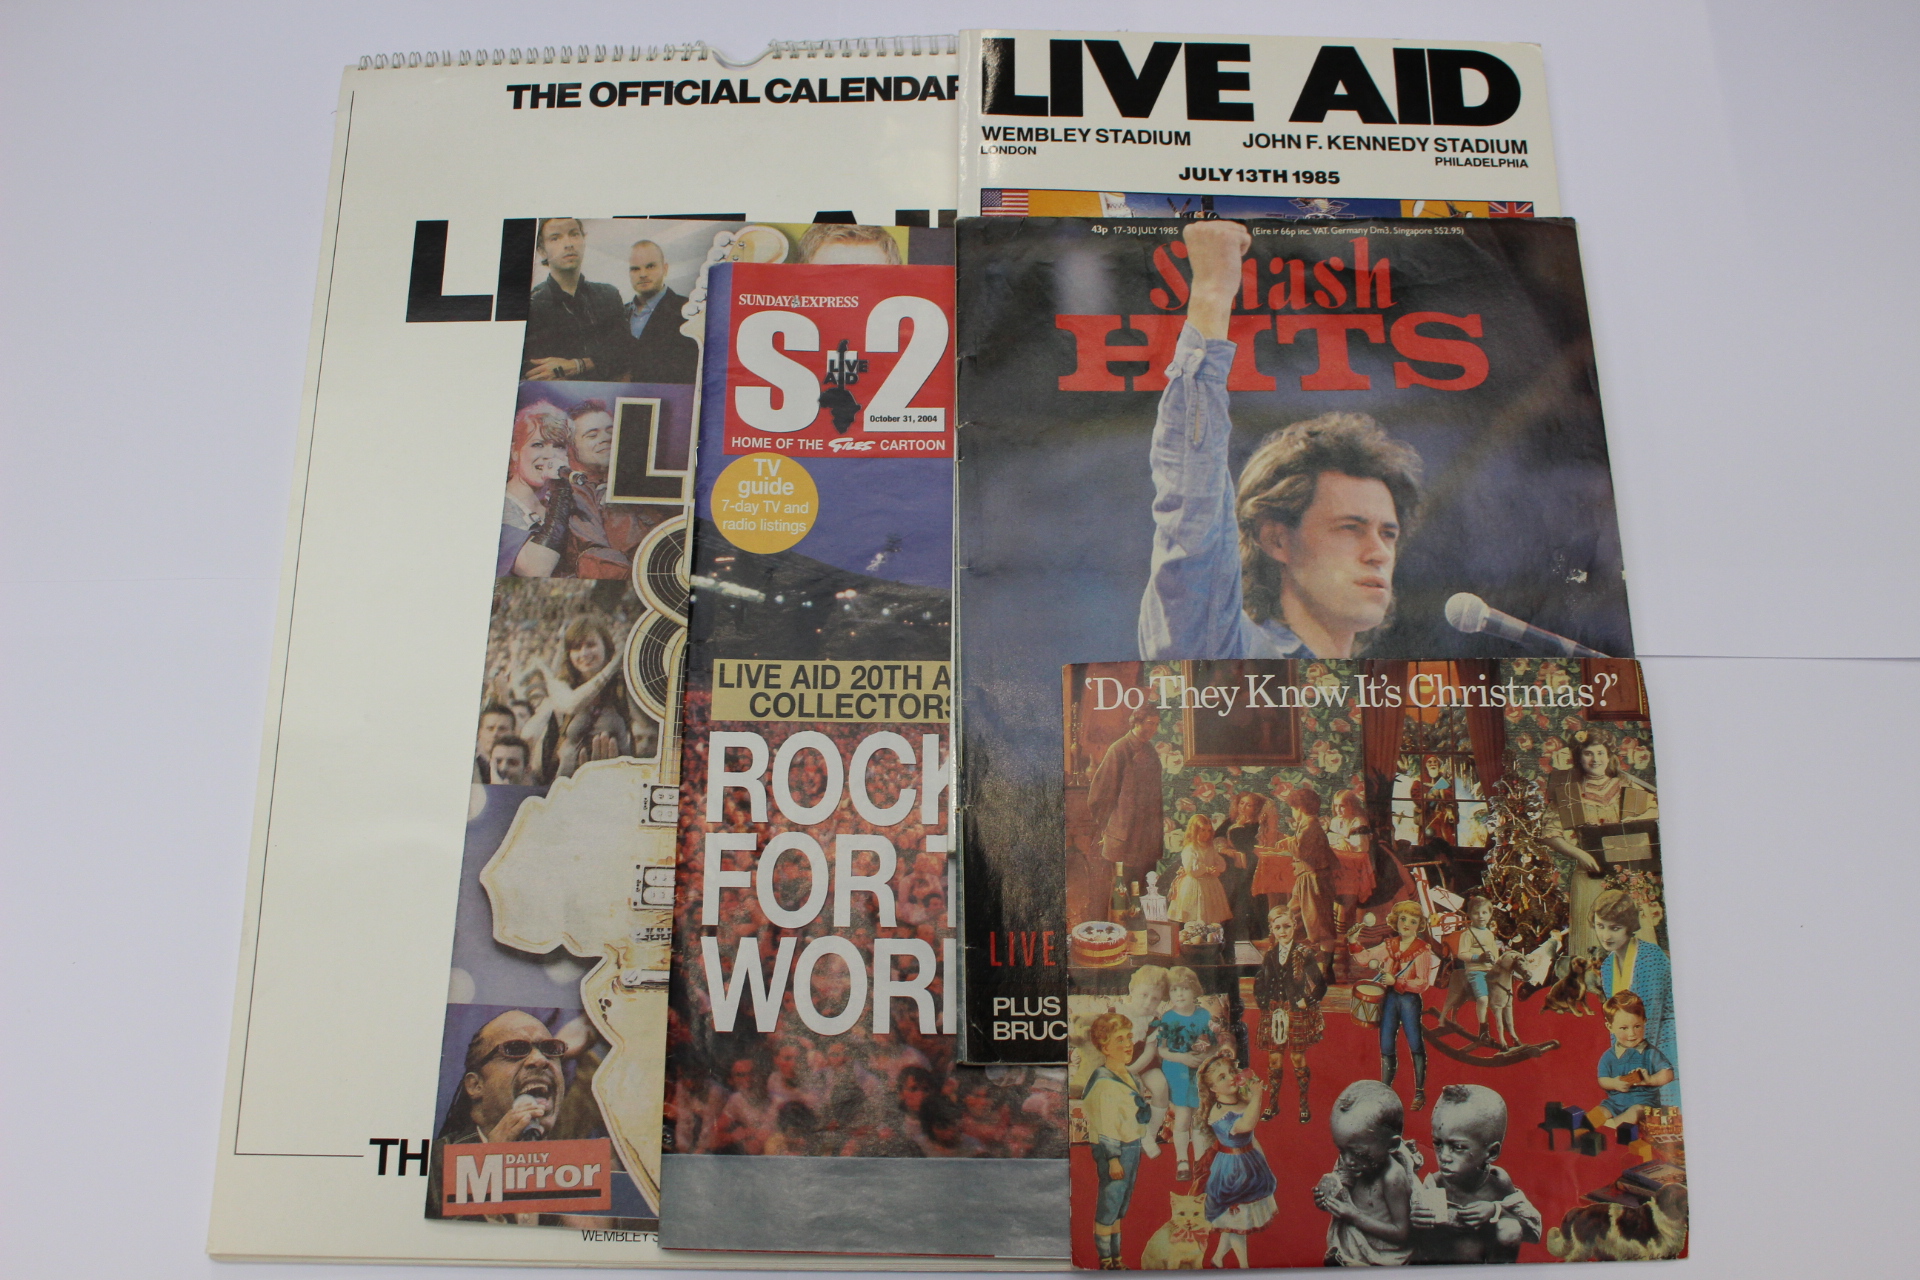 A collection of music memorabilia relating to LIVE AID, including Live Aid programme, calendar,